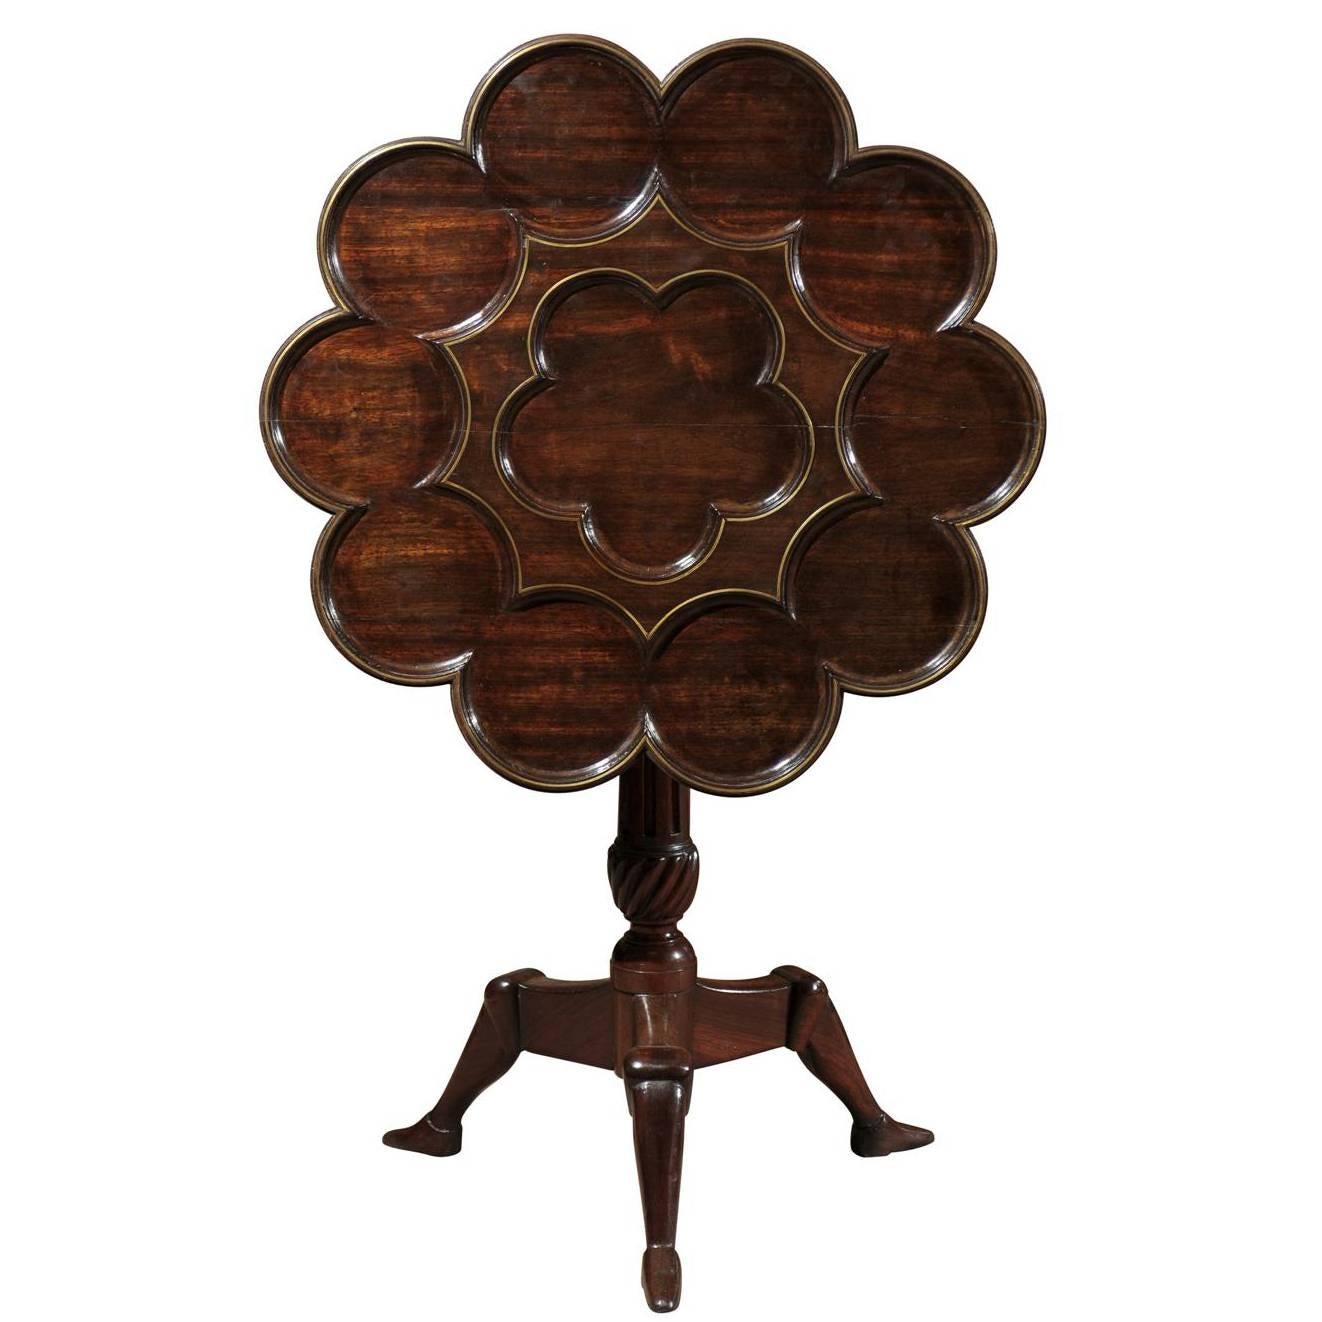 Manx Rosewood Tilt-Top Table with Carved Recesses and Brass Inlay, circa 1890